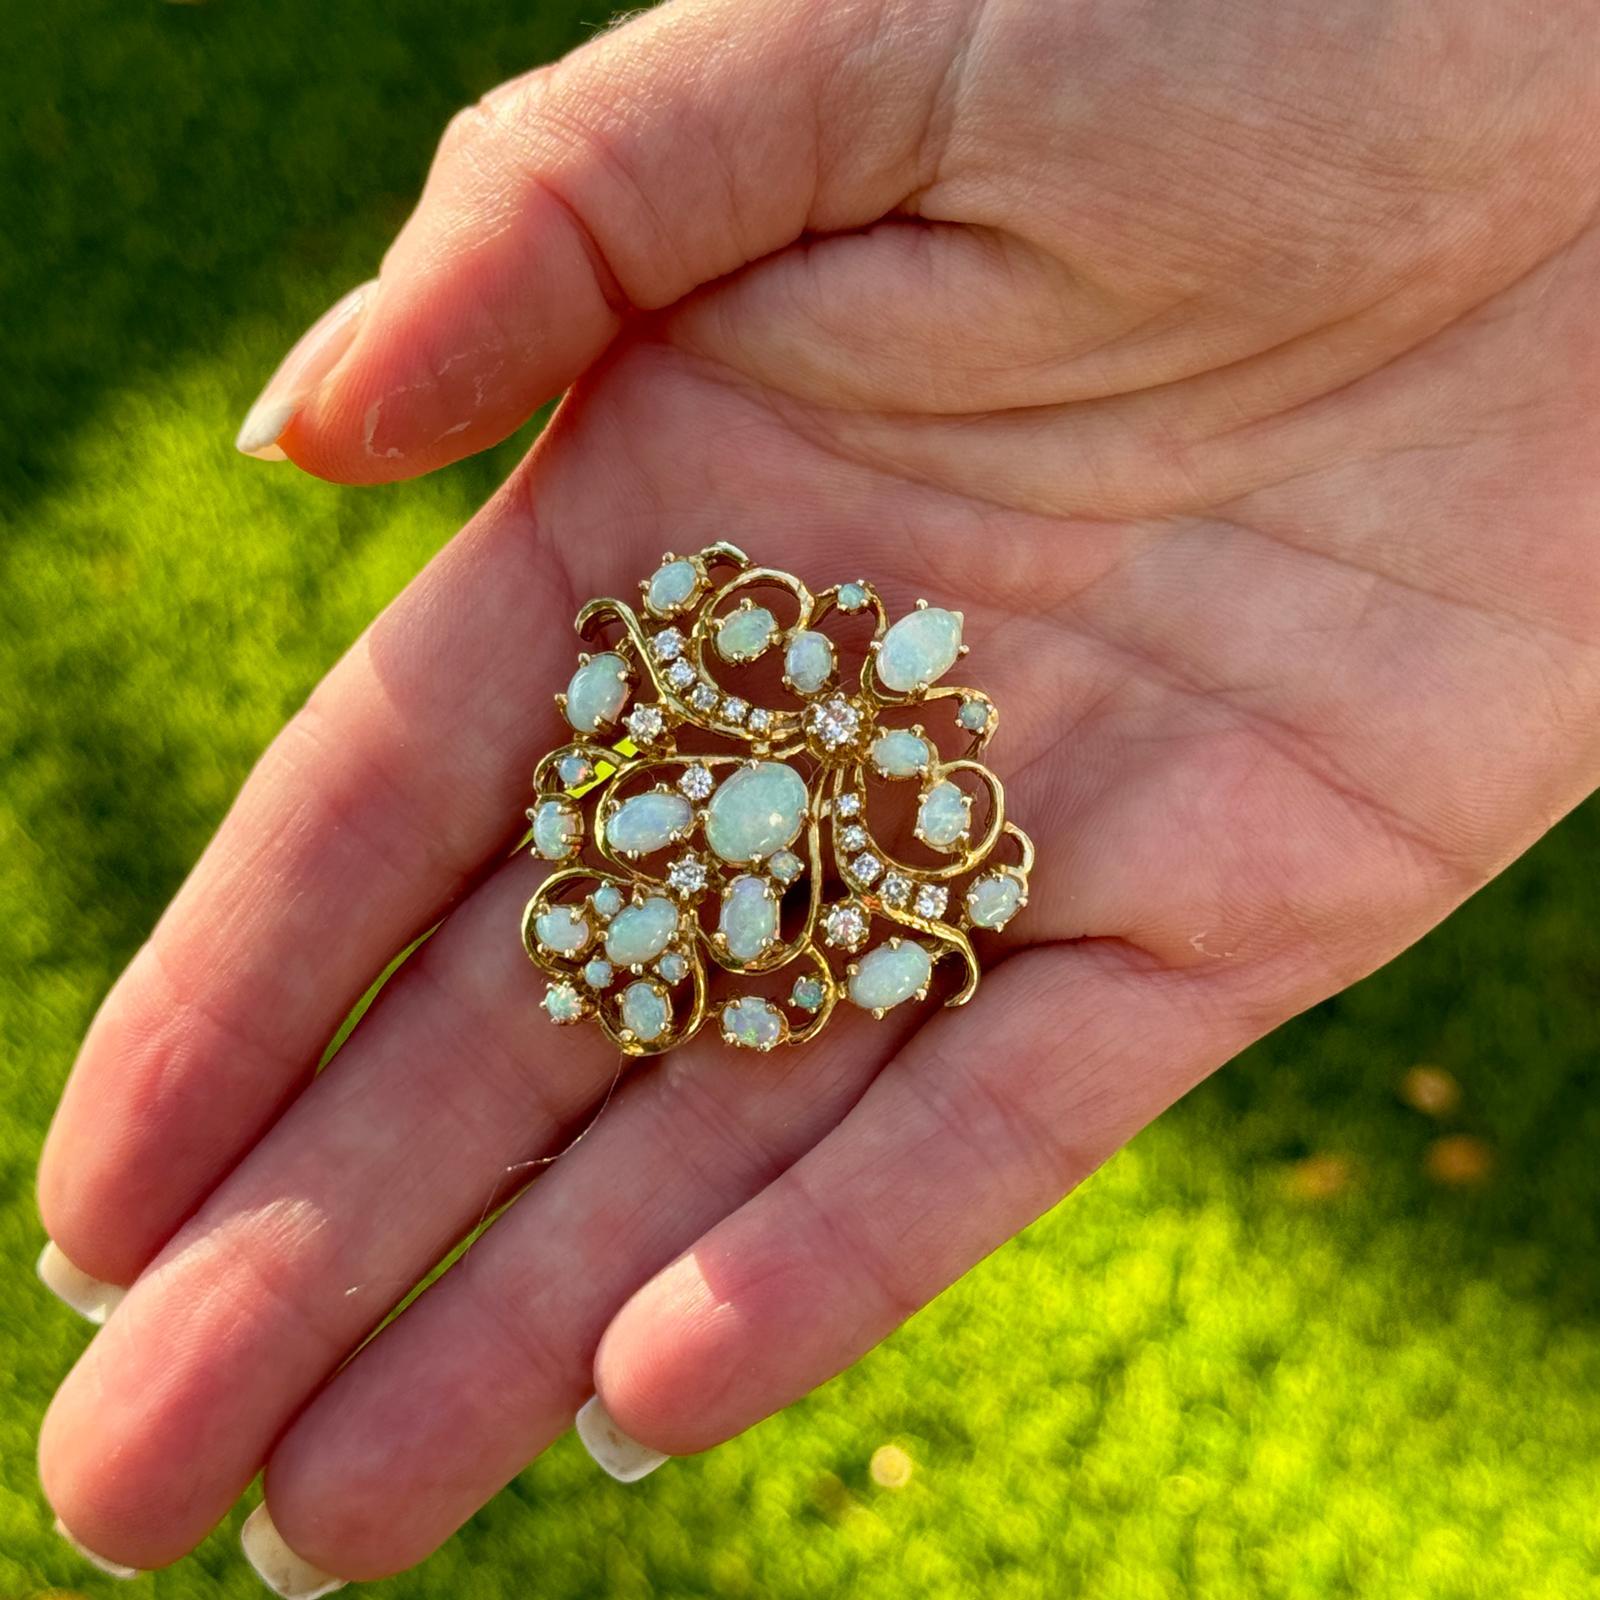 A 1950s Diamond Opal Pendant Brooch exudes vintage charm and elegance characteristic of mid-century jewelry design. The brooch is crafted from 14 karat yellow gold, a popular choice for vintage jewelry due to its warmth and durability. The delicate